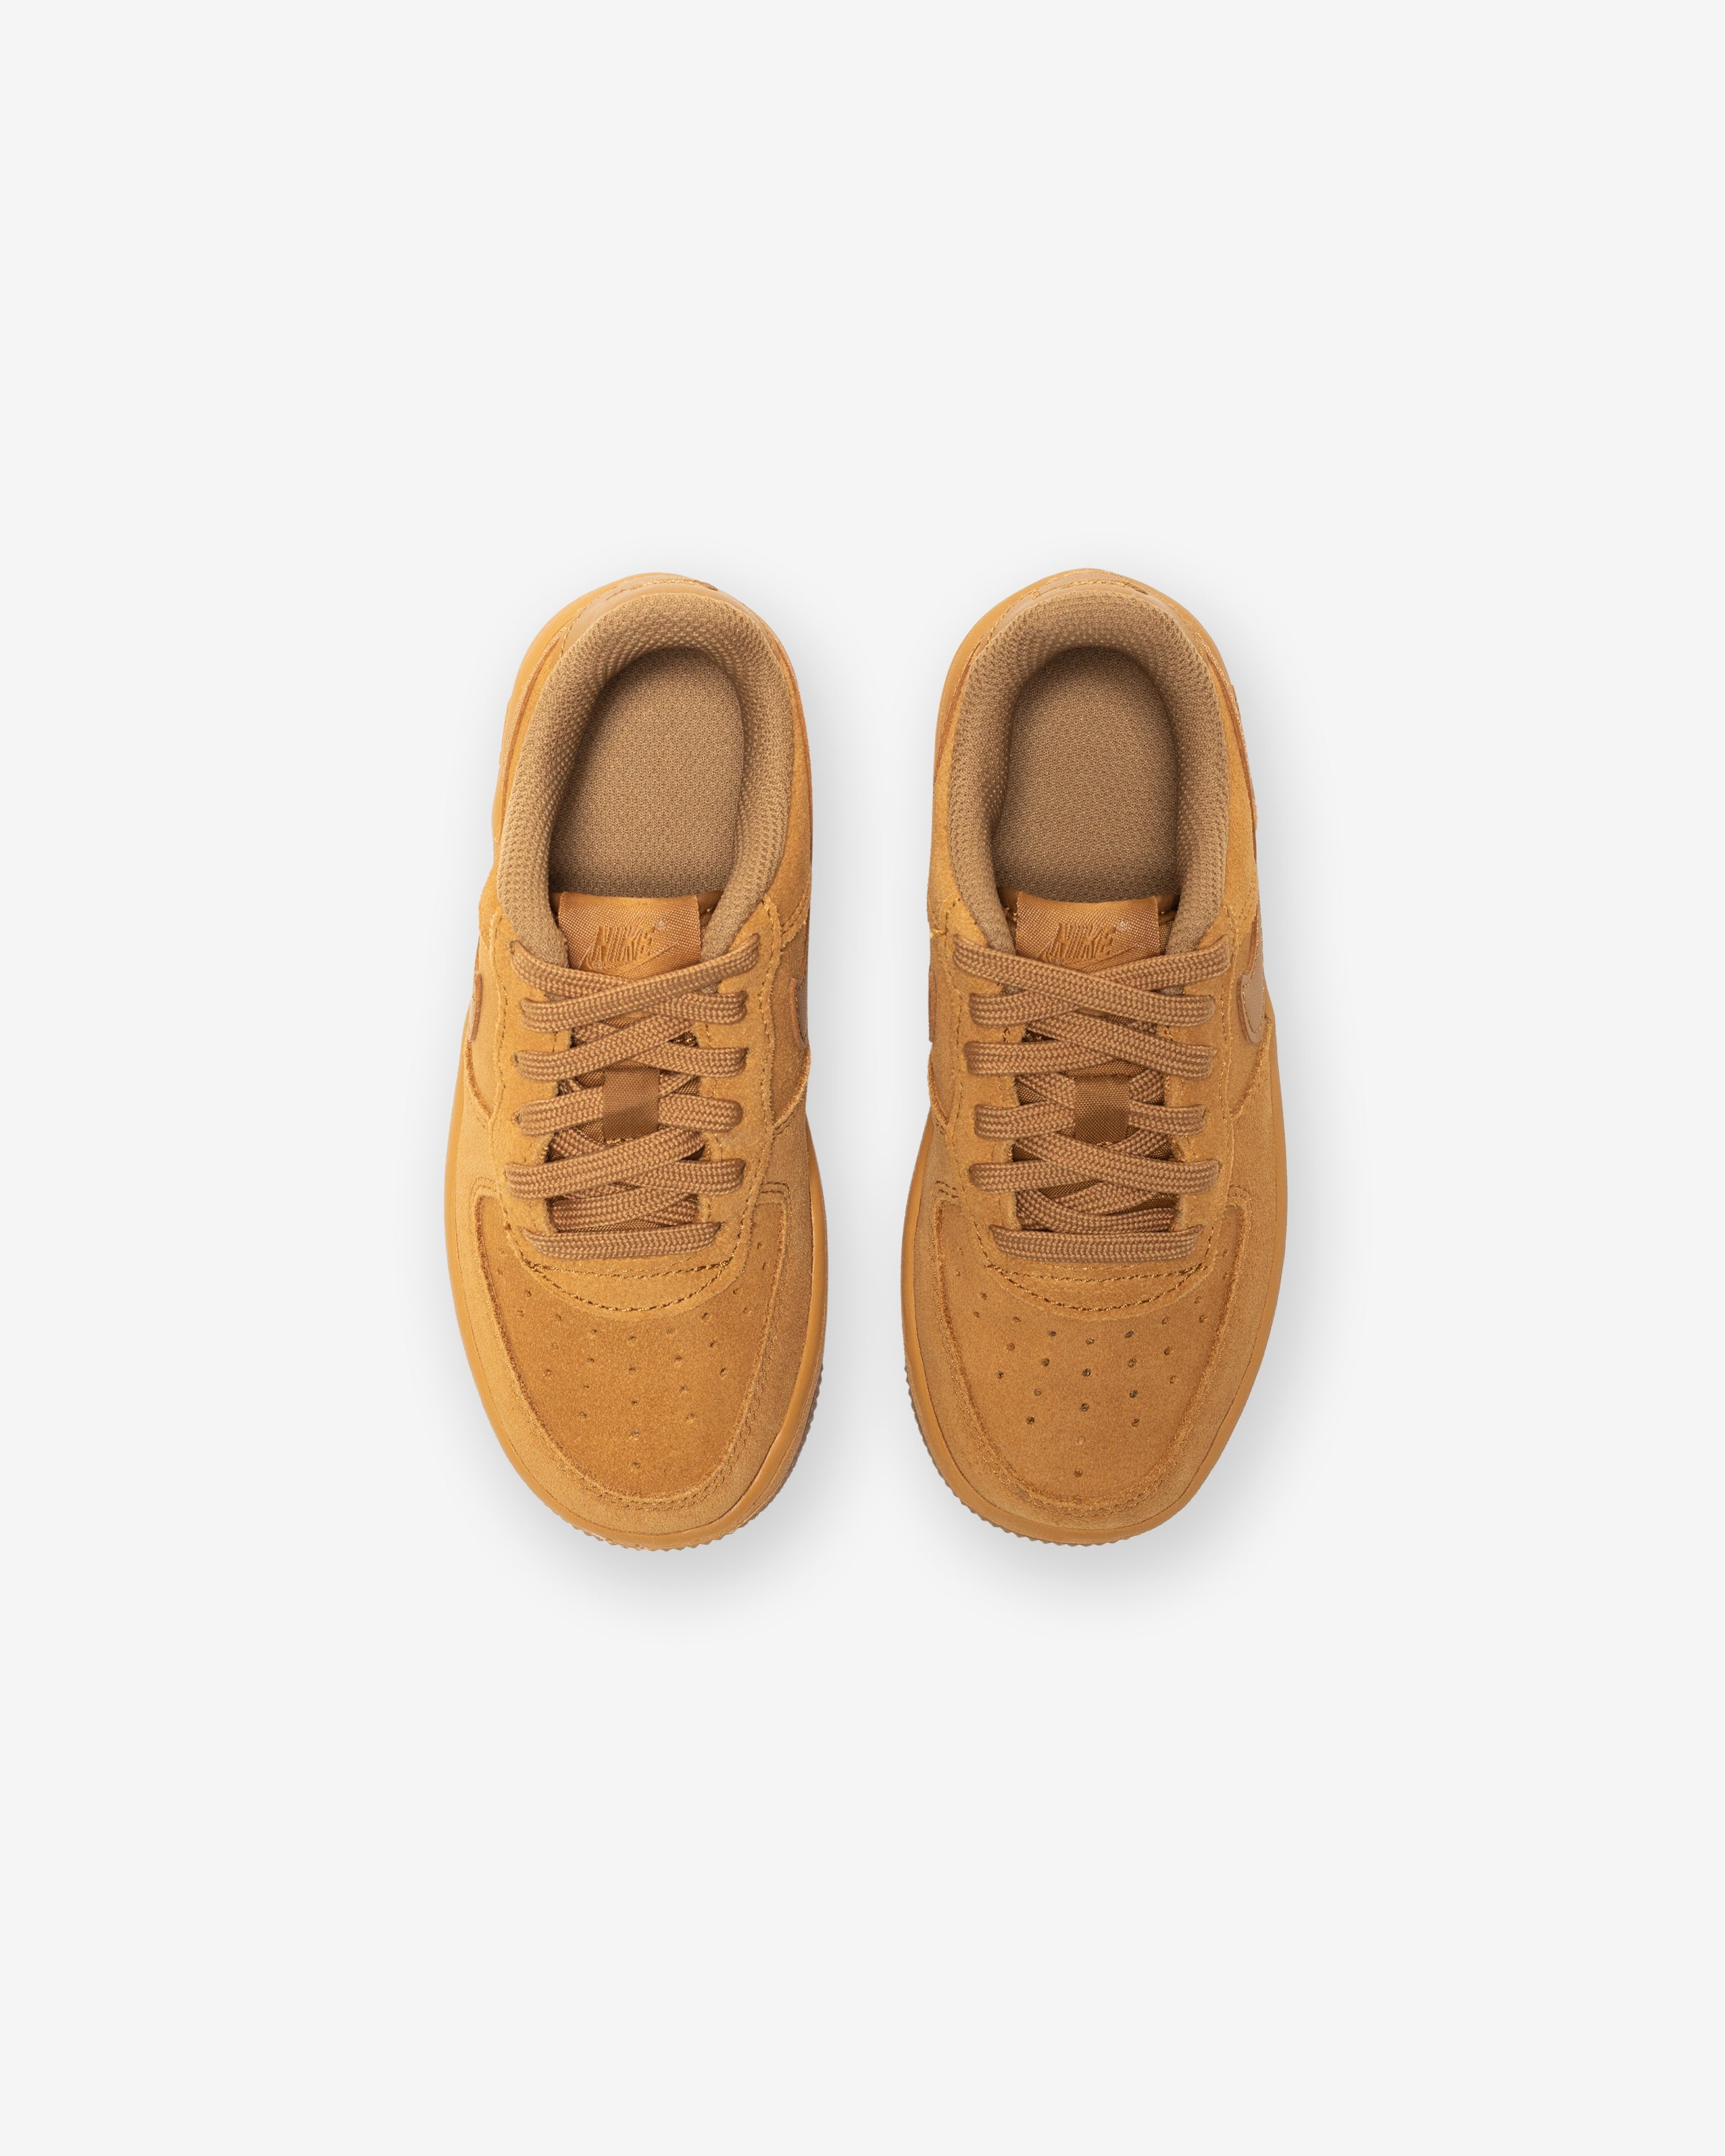 NIKE PS FORCE 1 LV8 3 - WHEAT/ GUMLIGHTBROWN